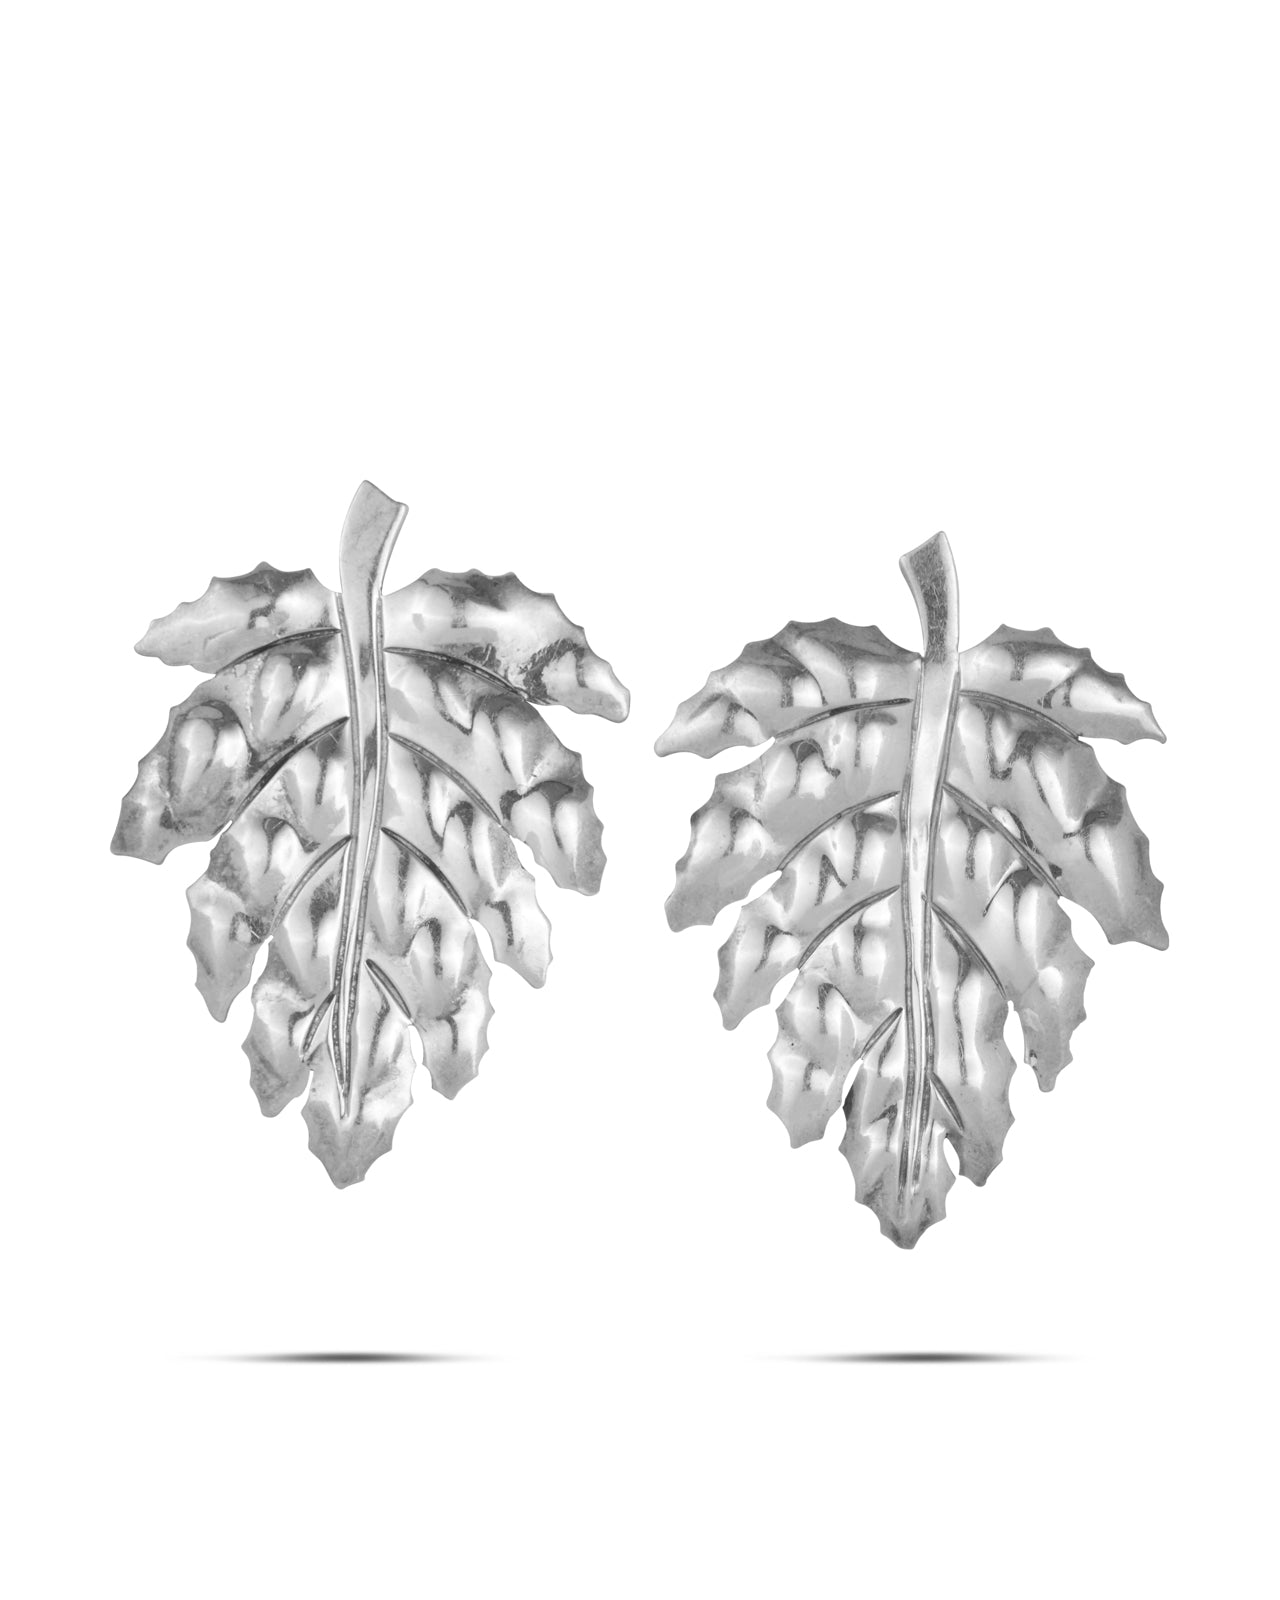 Vintage Mexican Silver Leaf Earrings, Taxco